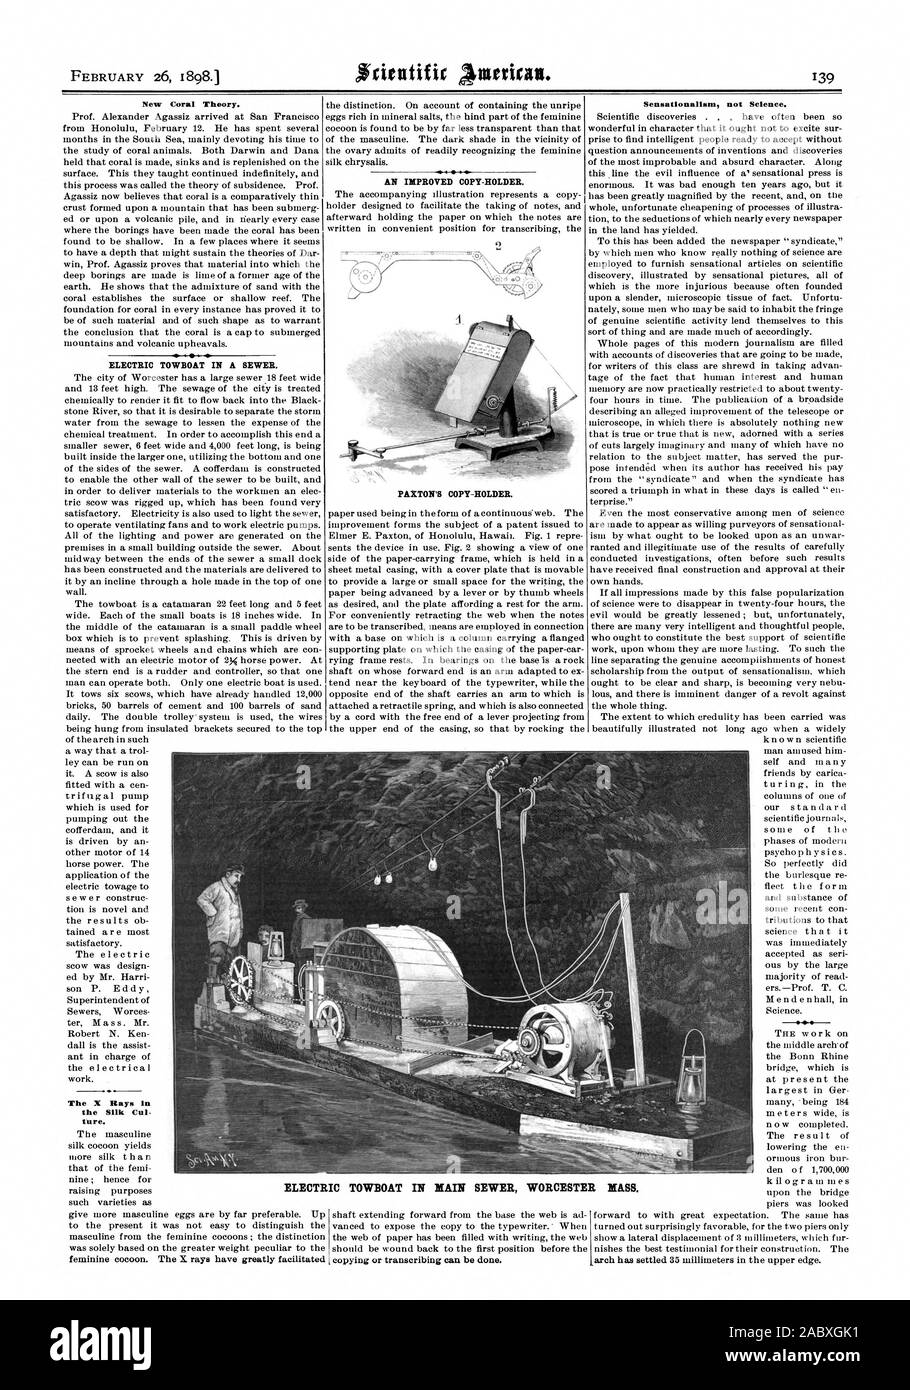 New Coral Theory. ELECTRIC TOWBOAT IN A SEWER. The X Hays In the Silk Cul. tare. AN IMPROVED COPY-HOLDER. PAXTON'S COPY-HOLDER. Sensationalism not Science. ELECTRIC TOWBOAT IN MAIN SEWER WORCESTER MASS., scientific american, 1898-02-26 Stock Photo